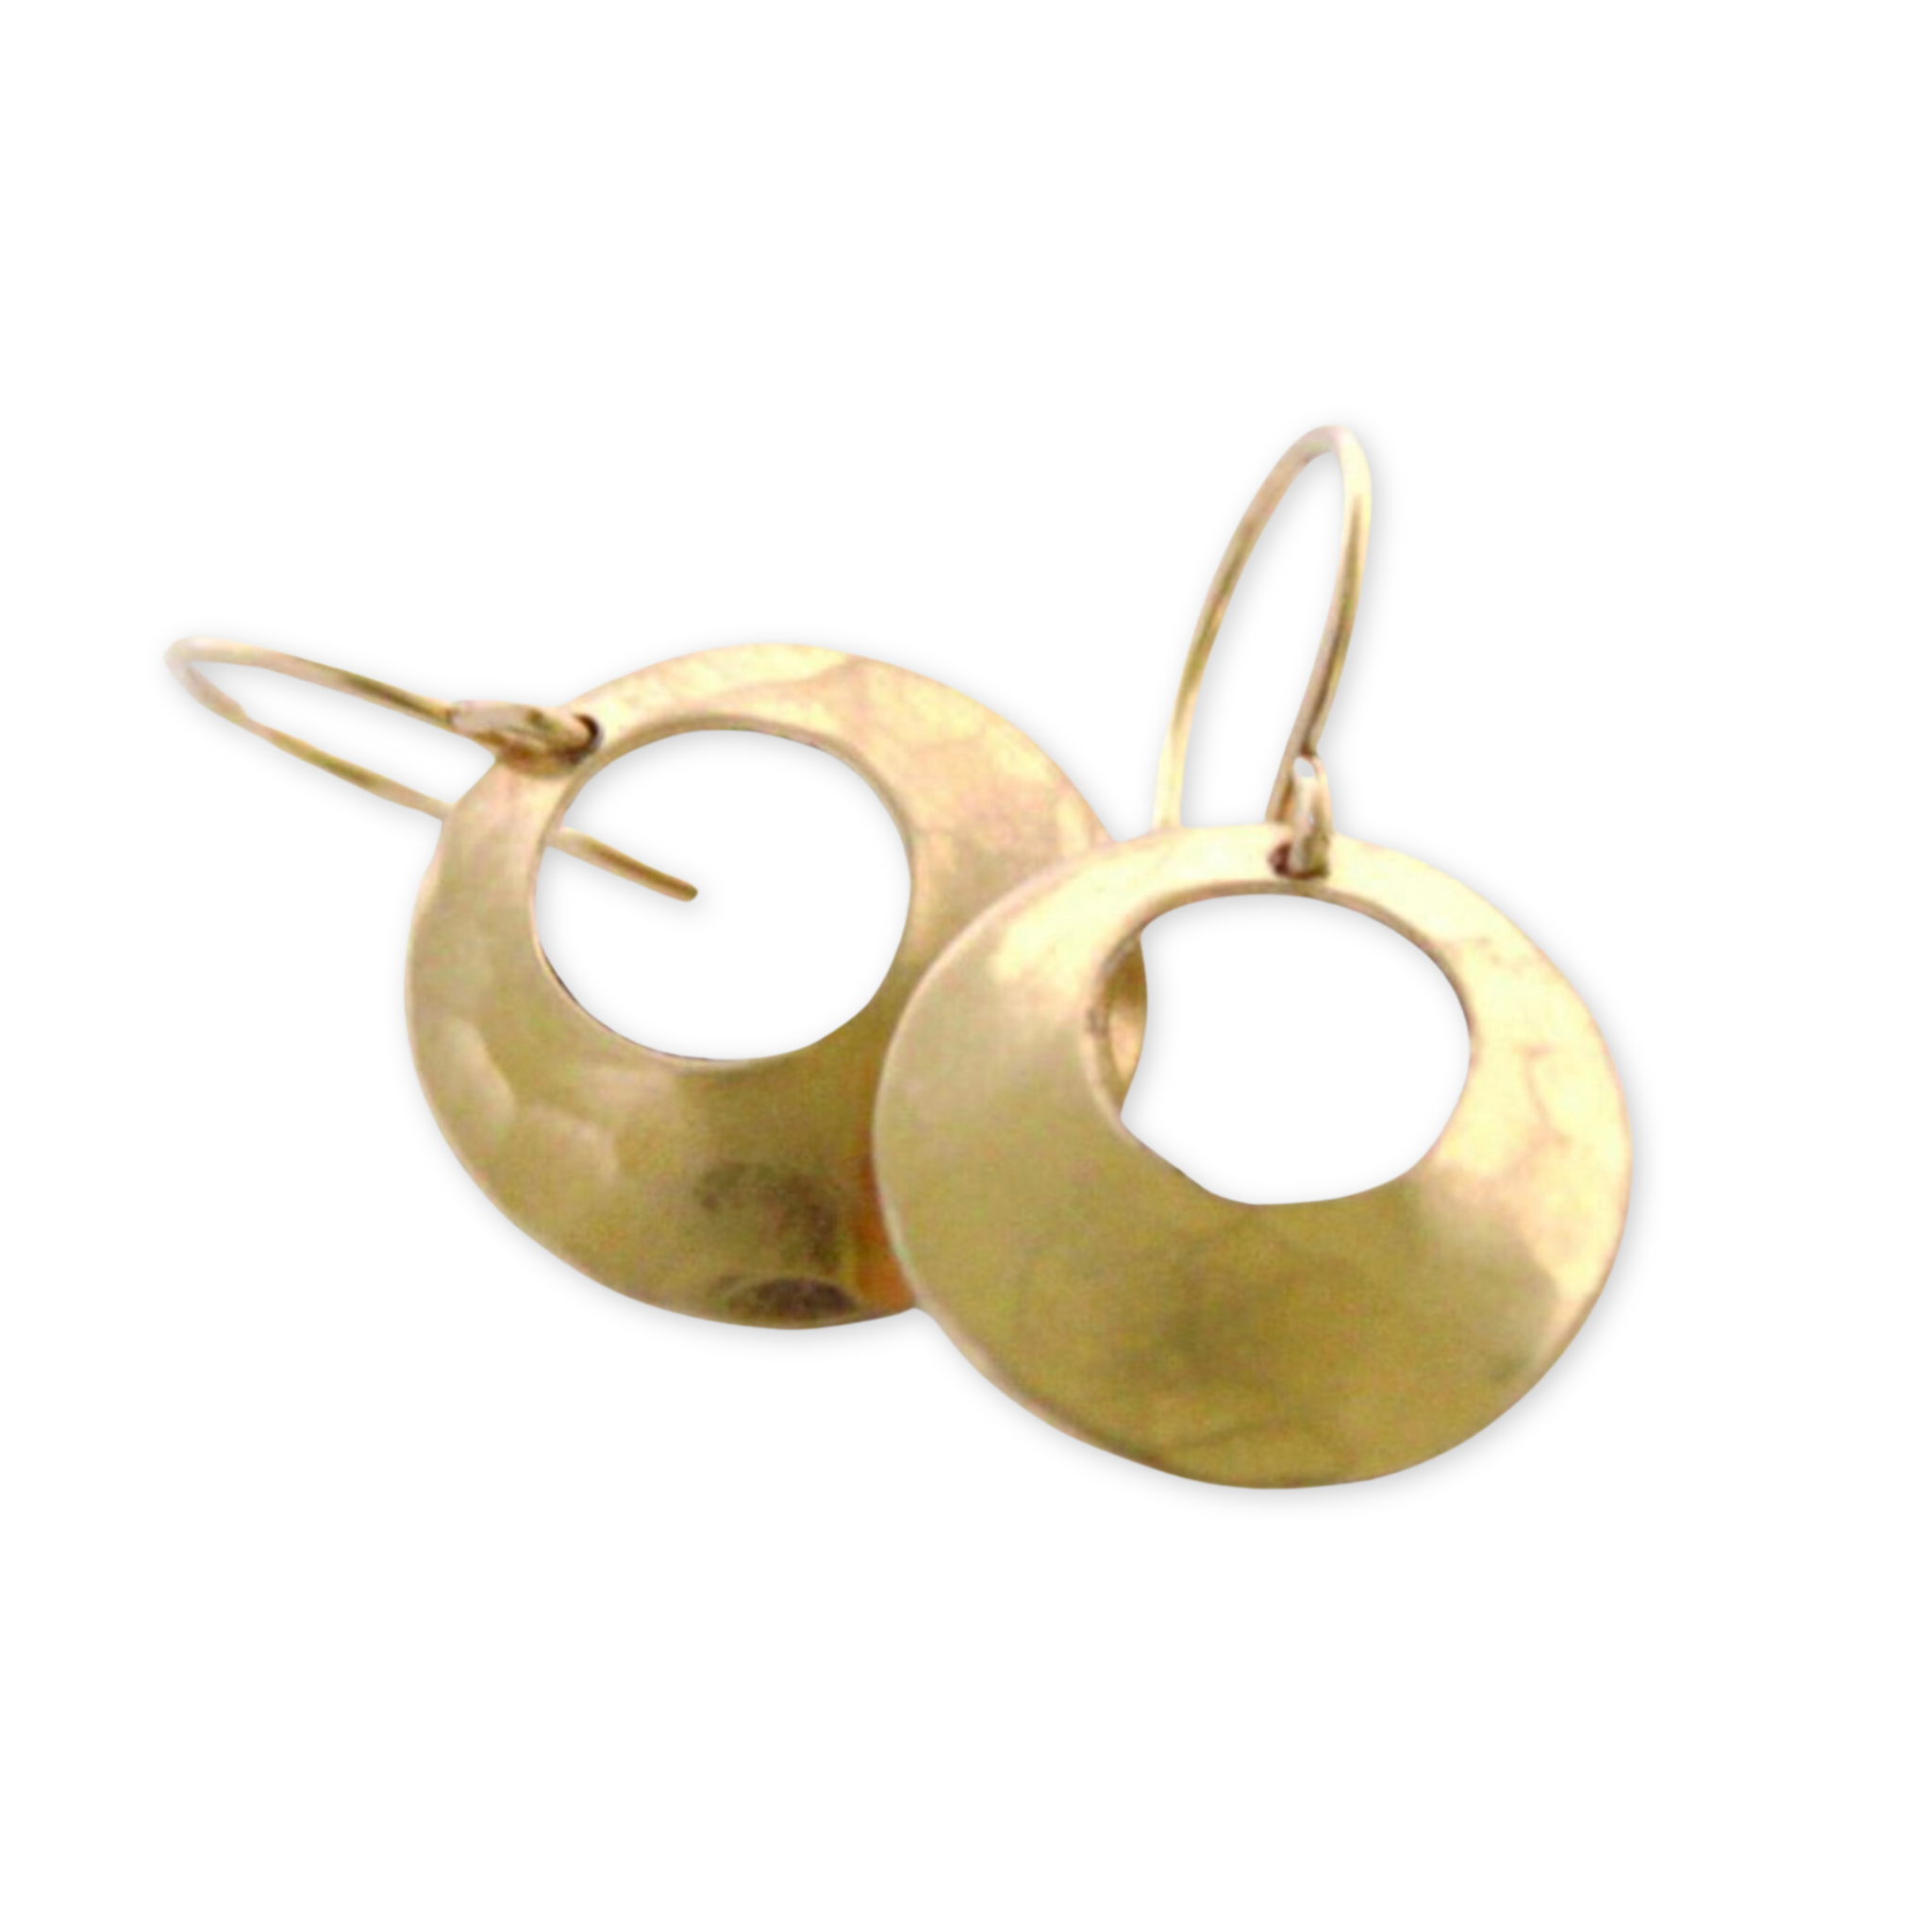 a pair of earrings with gold discs with holes in the middle